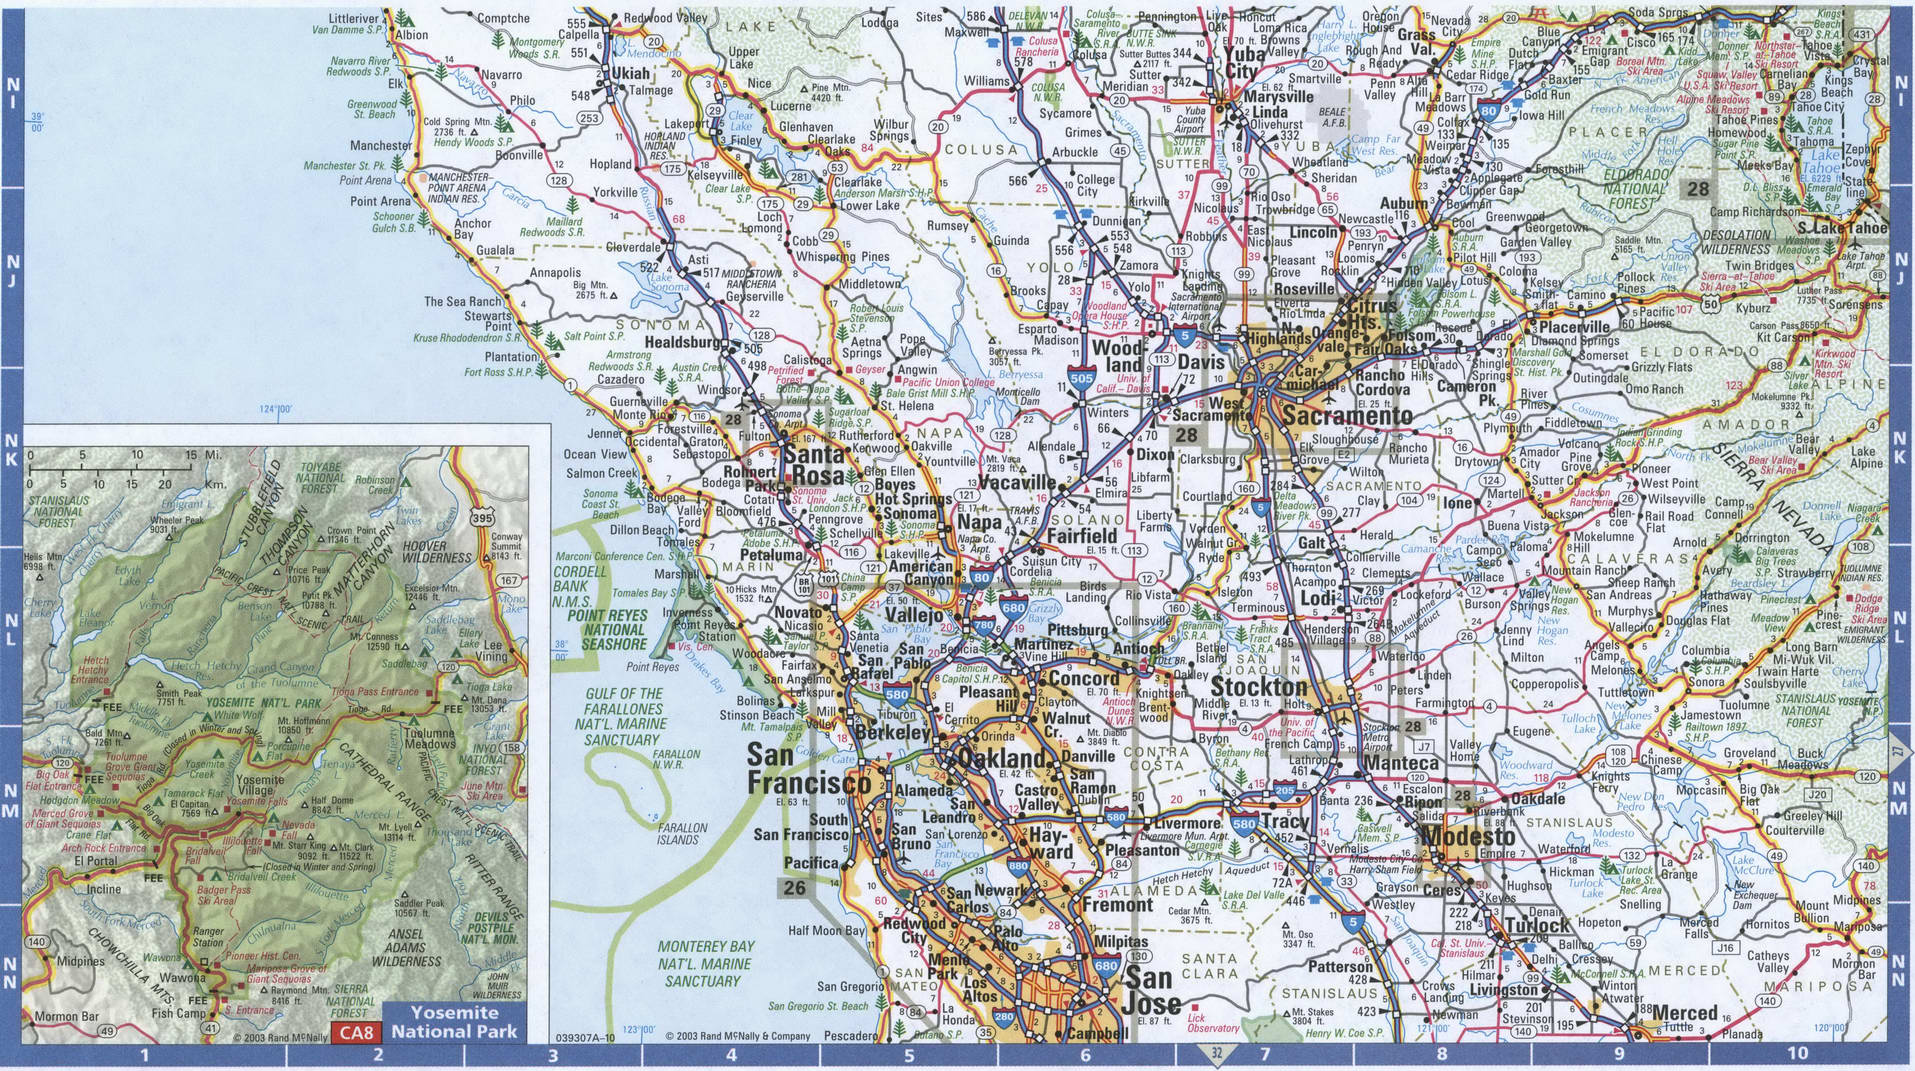 Northern California detailed roads map